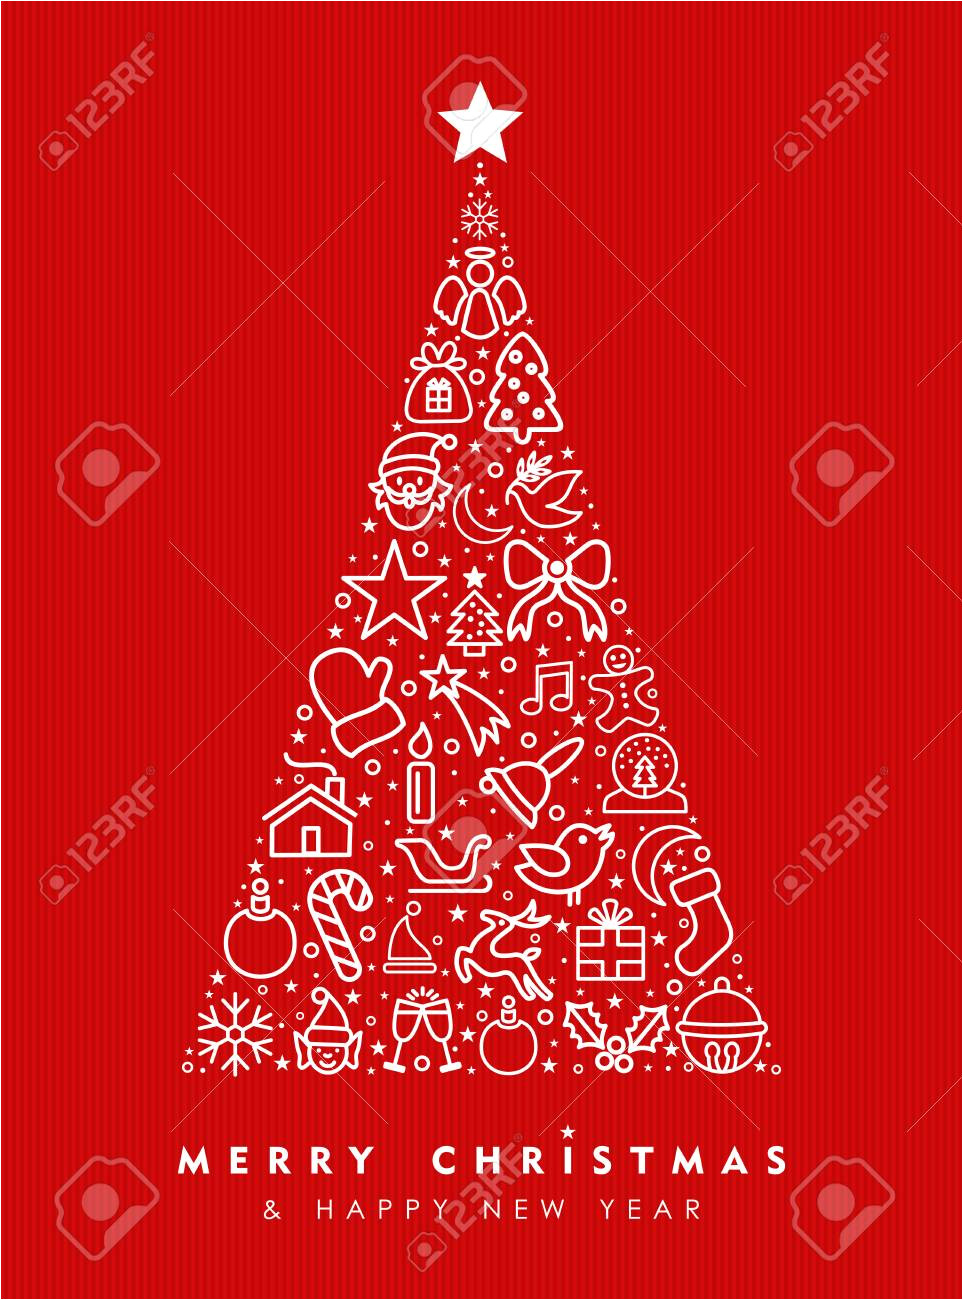 86492000 merry christmas and happy new year greeting card design red holiday line art icon illustration makin jpg